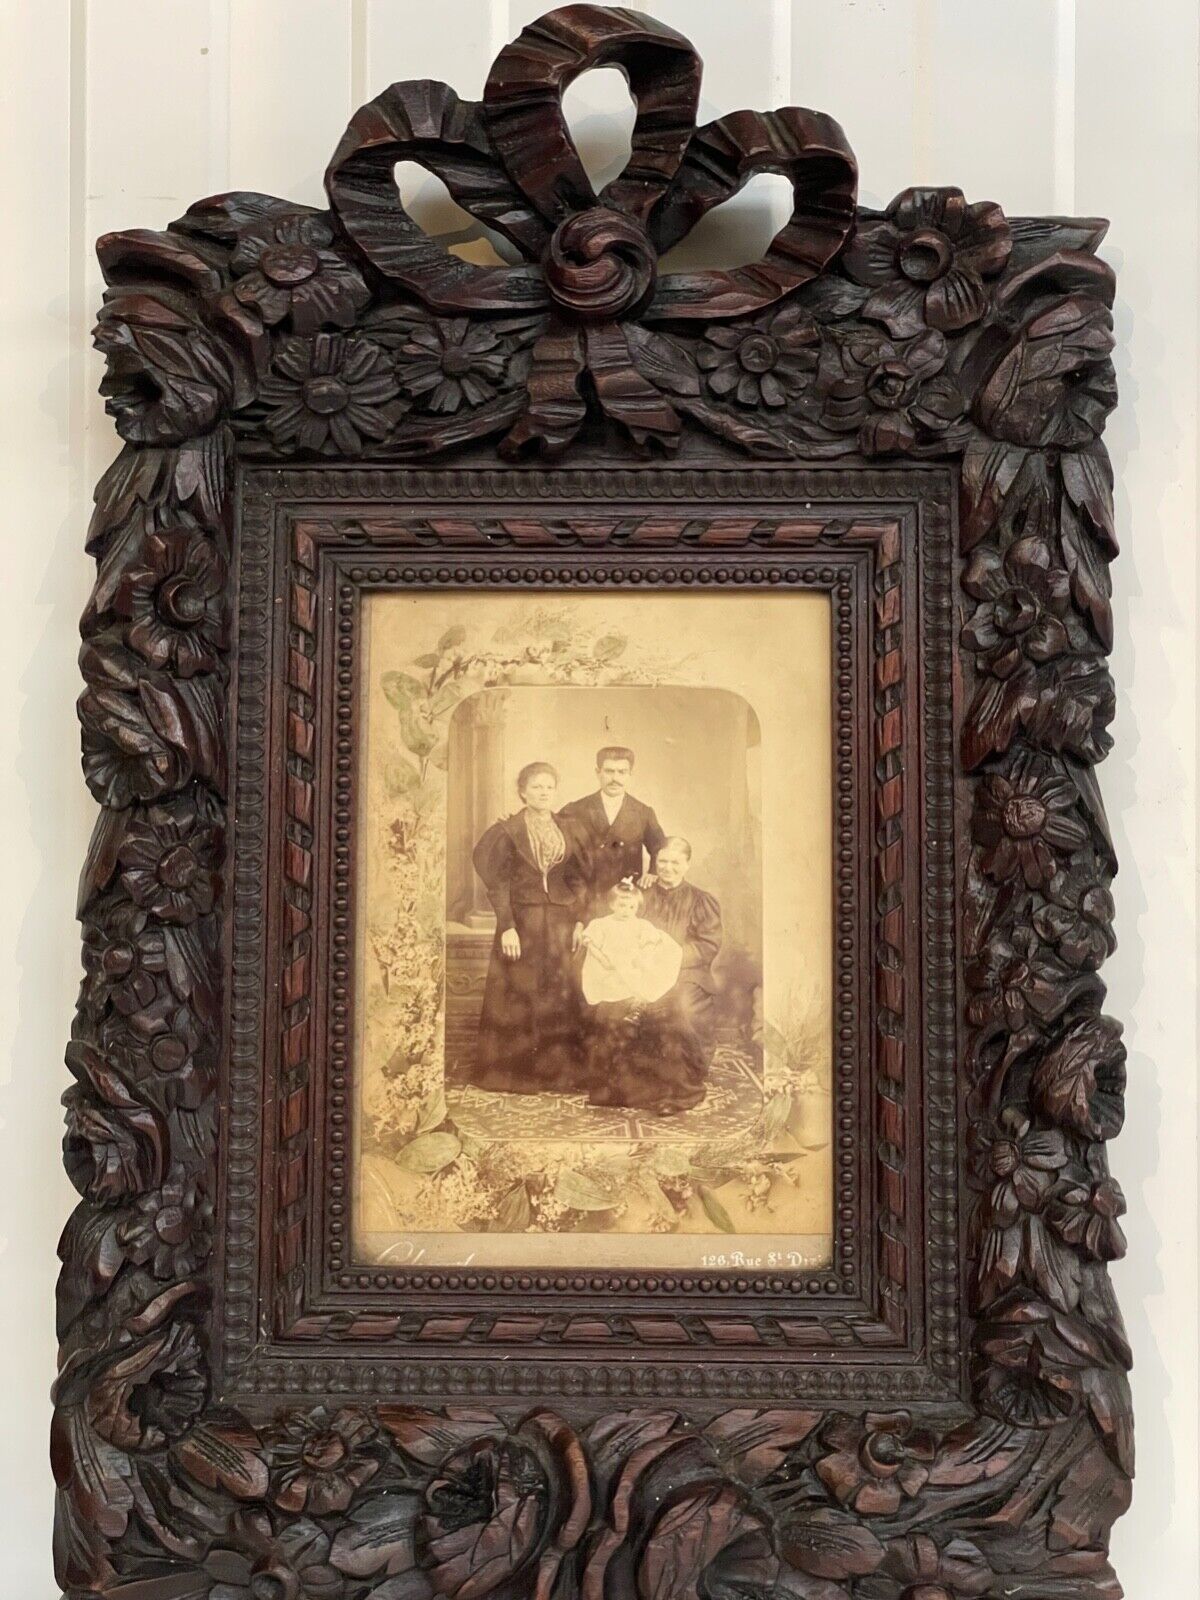 SALE  STUNNING French Louis xvi / Black Forest picture frame carved in wood